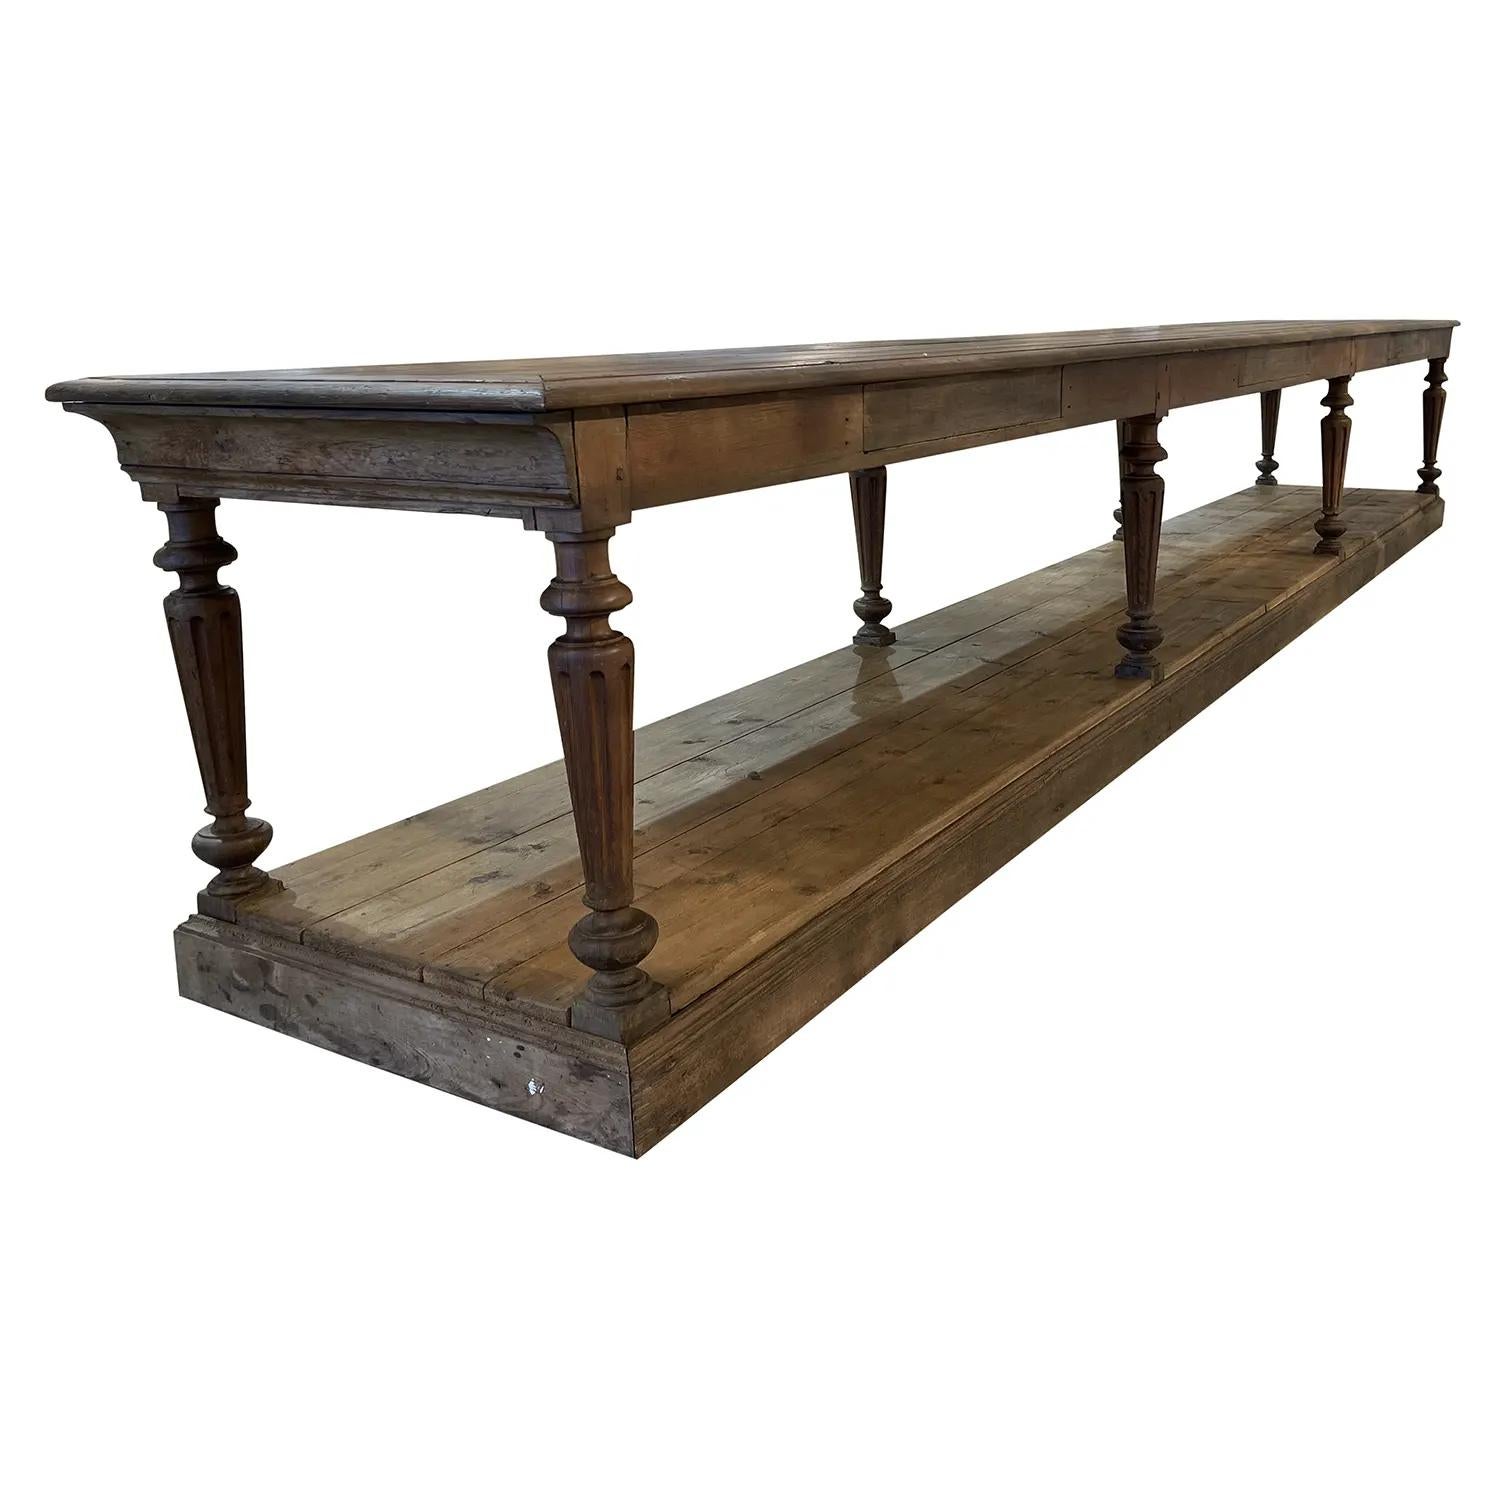 A 19th century, dark-brown antique monumental French tailor’s, drapers table made of hand crafted oakwood, in good condition. The large table is detailed with a scrubbed top, composed with a heavy low shelf, standing on eight round turned legs.